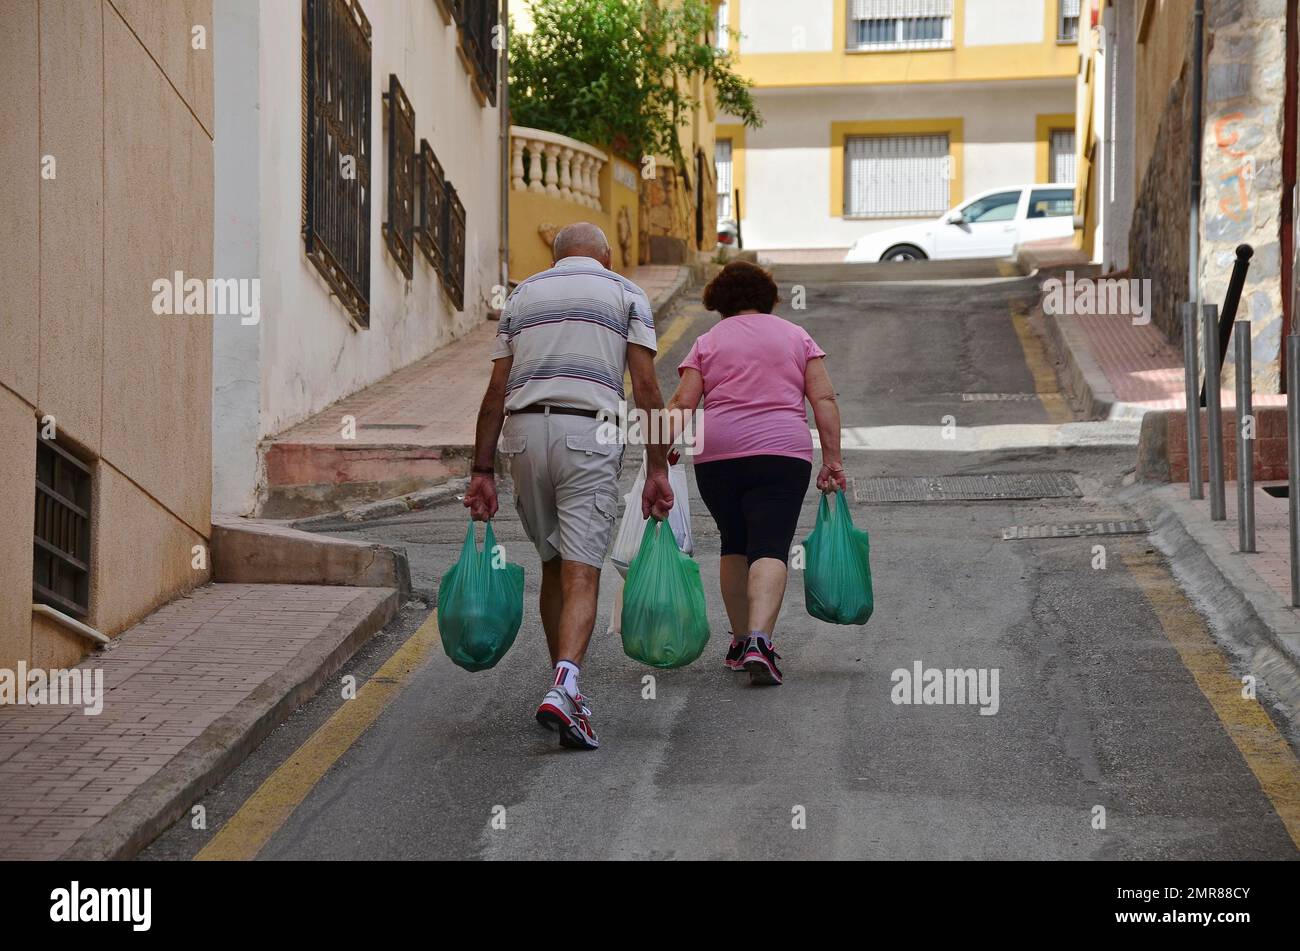 Couple from behind walking up steep street with green shopping bags, Garrucha, Andalucia, Spain, Europe Stock Photo